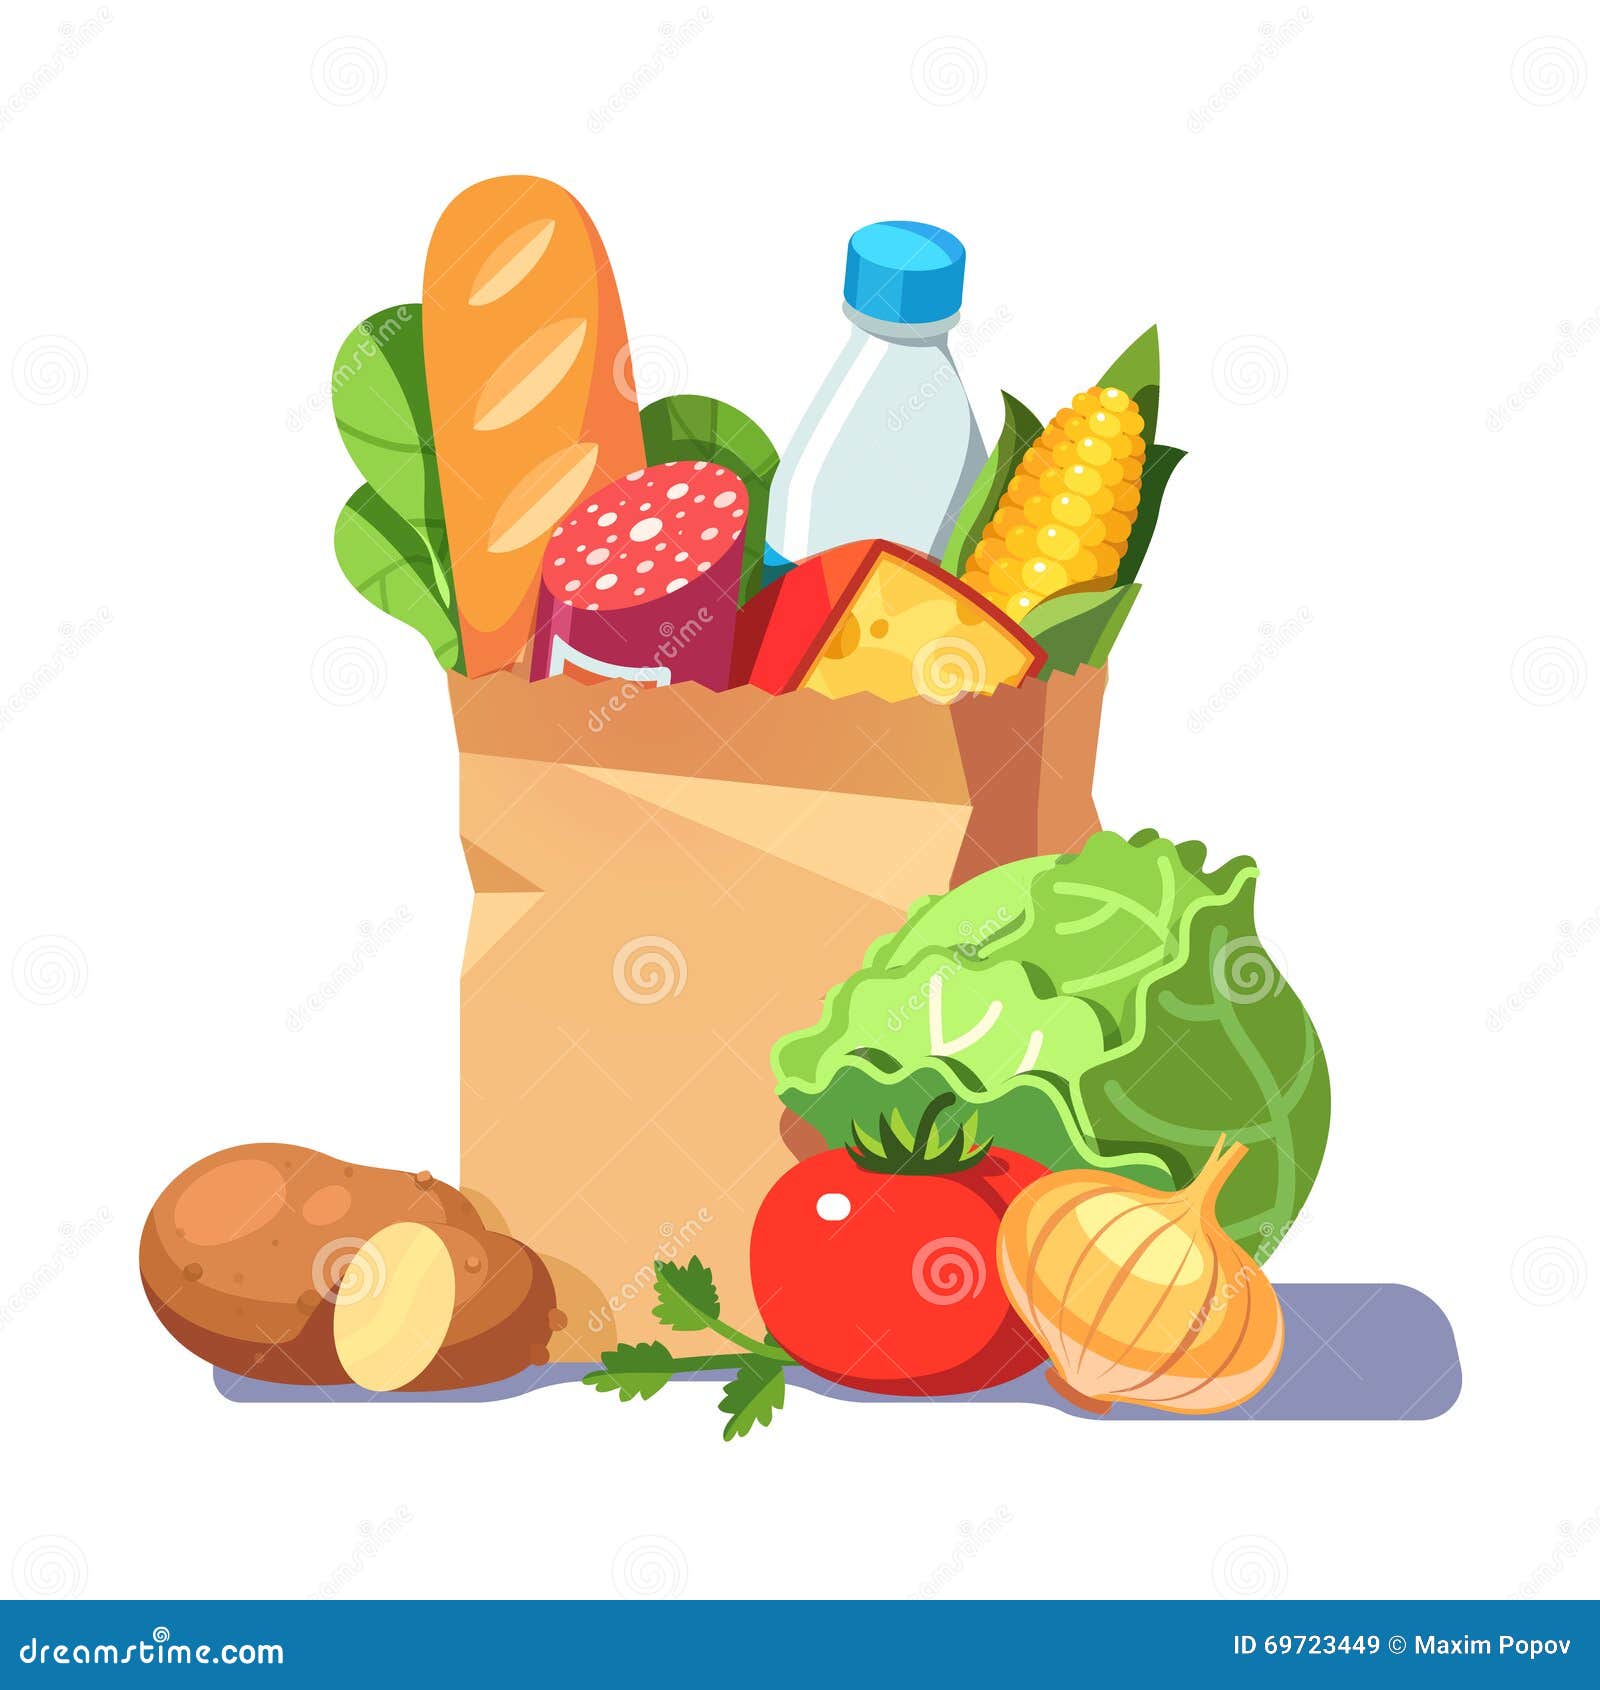 Groceries in a paper bag stock vector. Illustration of cheese - 69723449